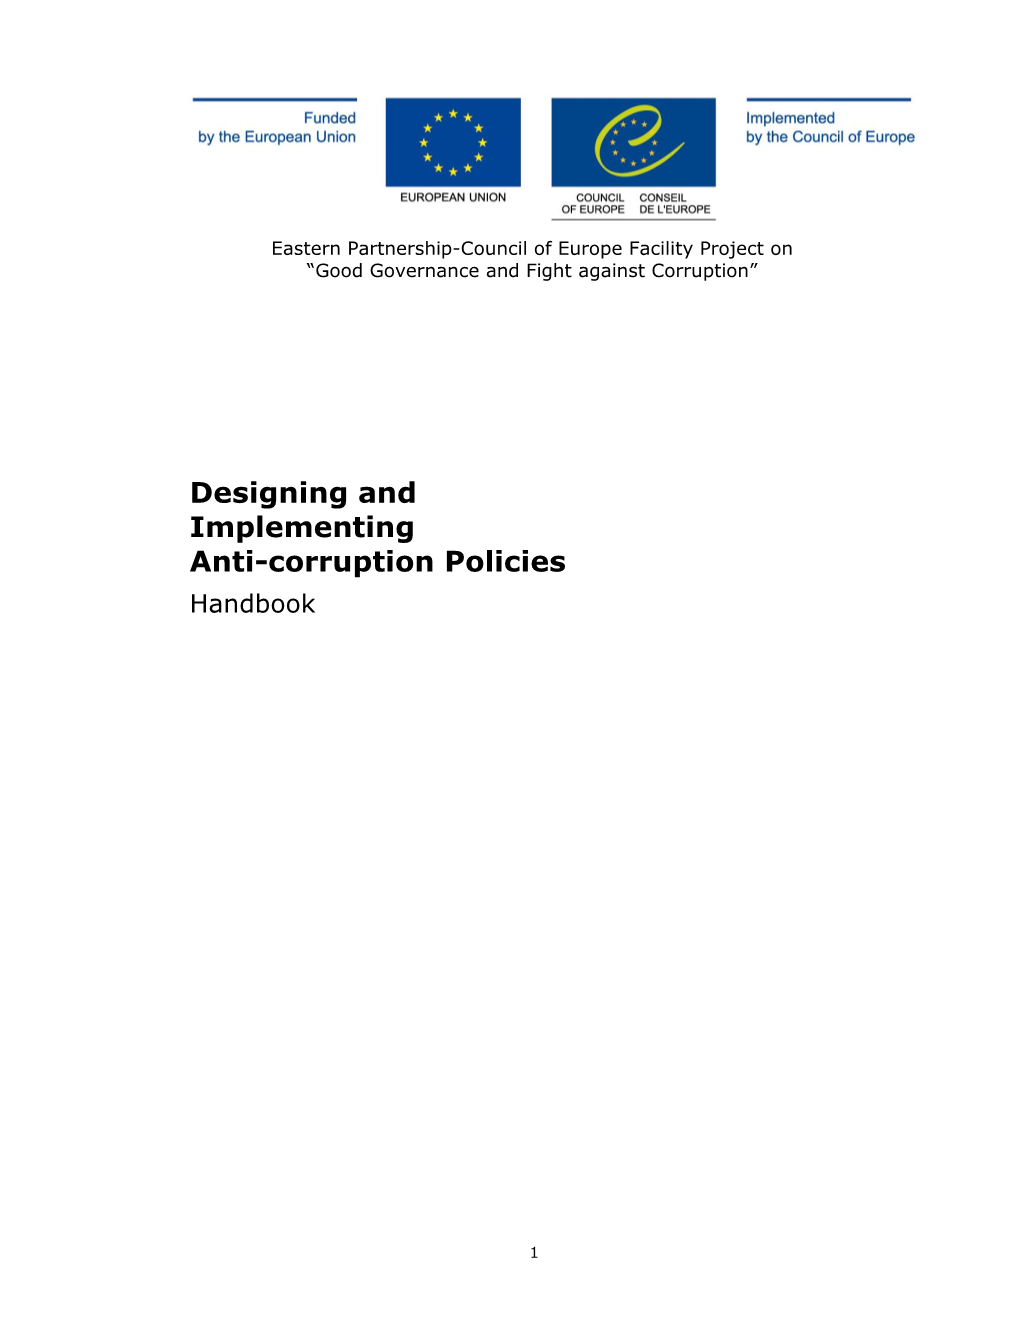 Designing and Implementing Anti-Corruption Policies Handbook